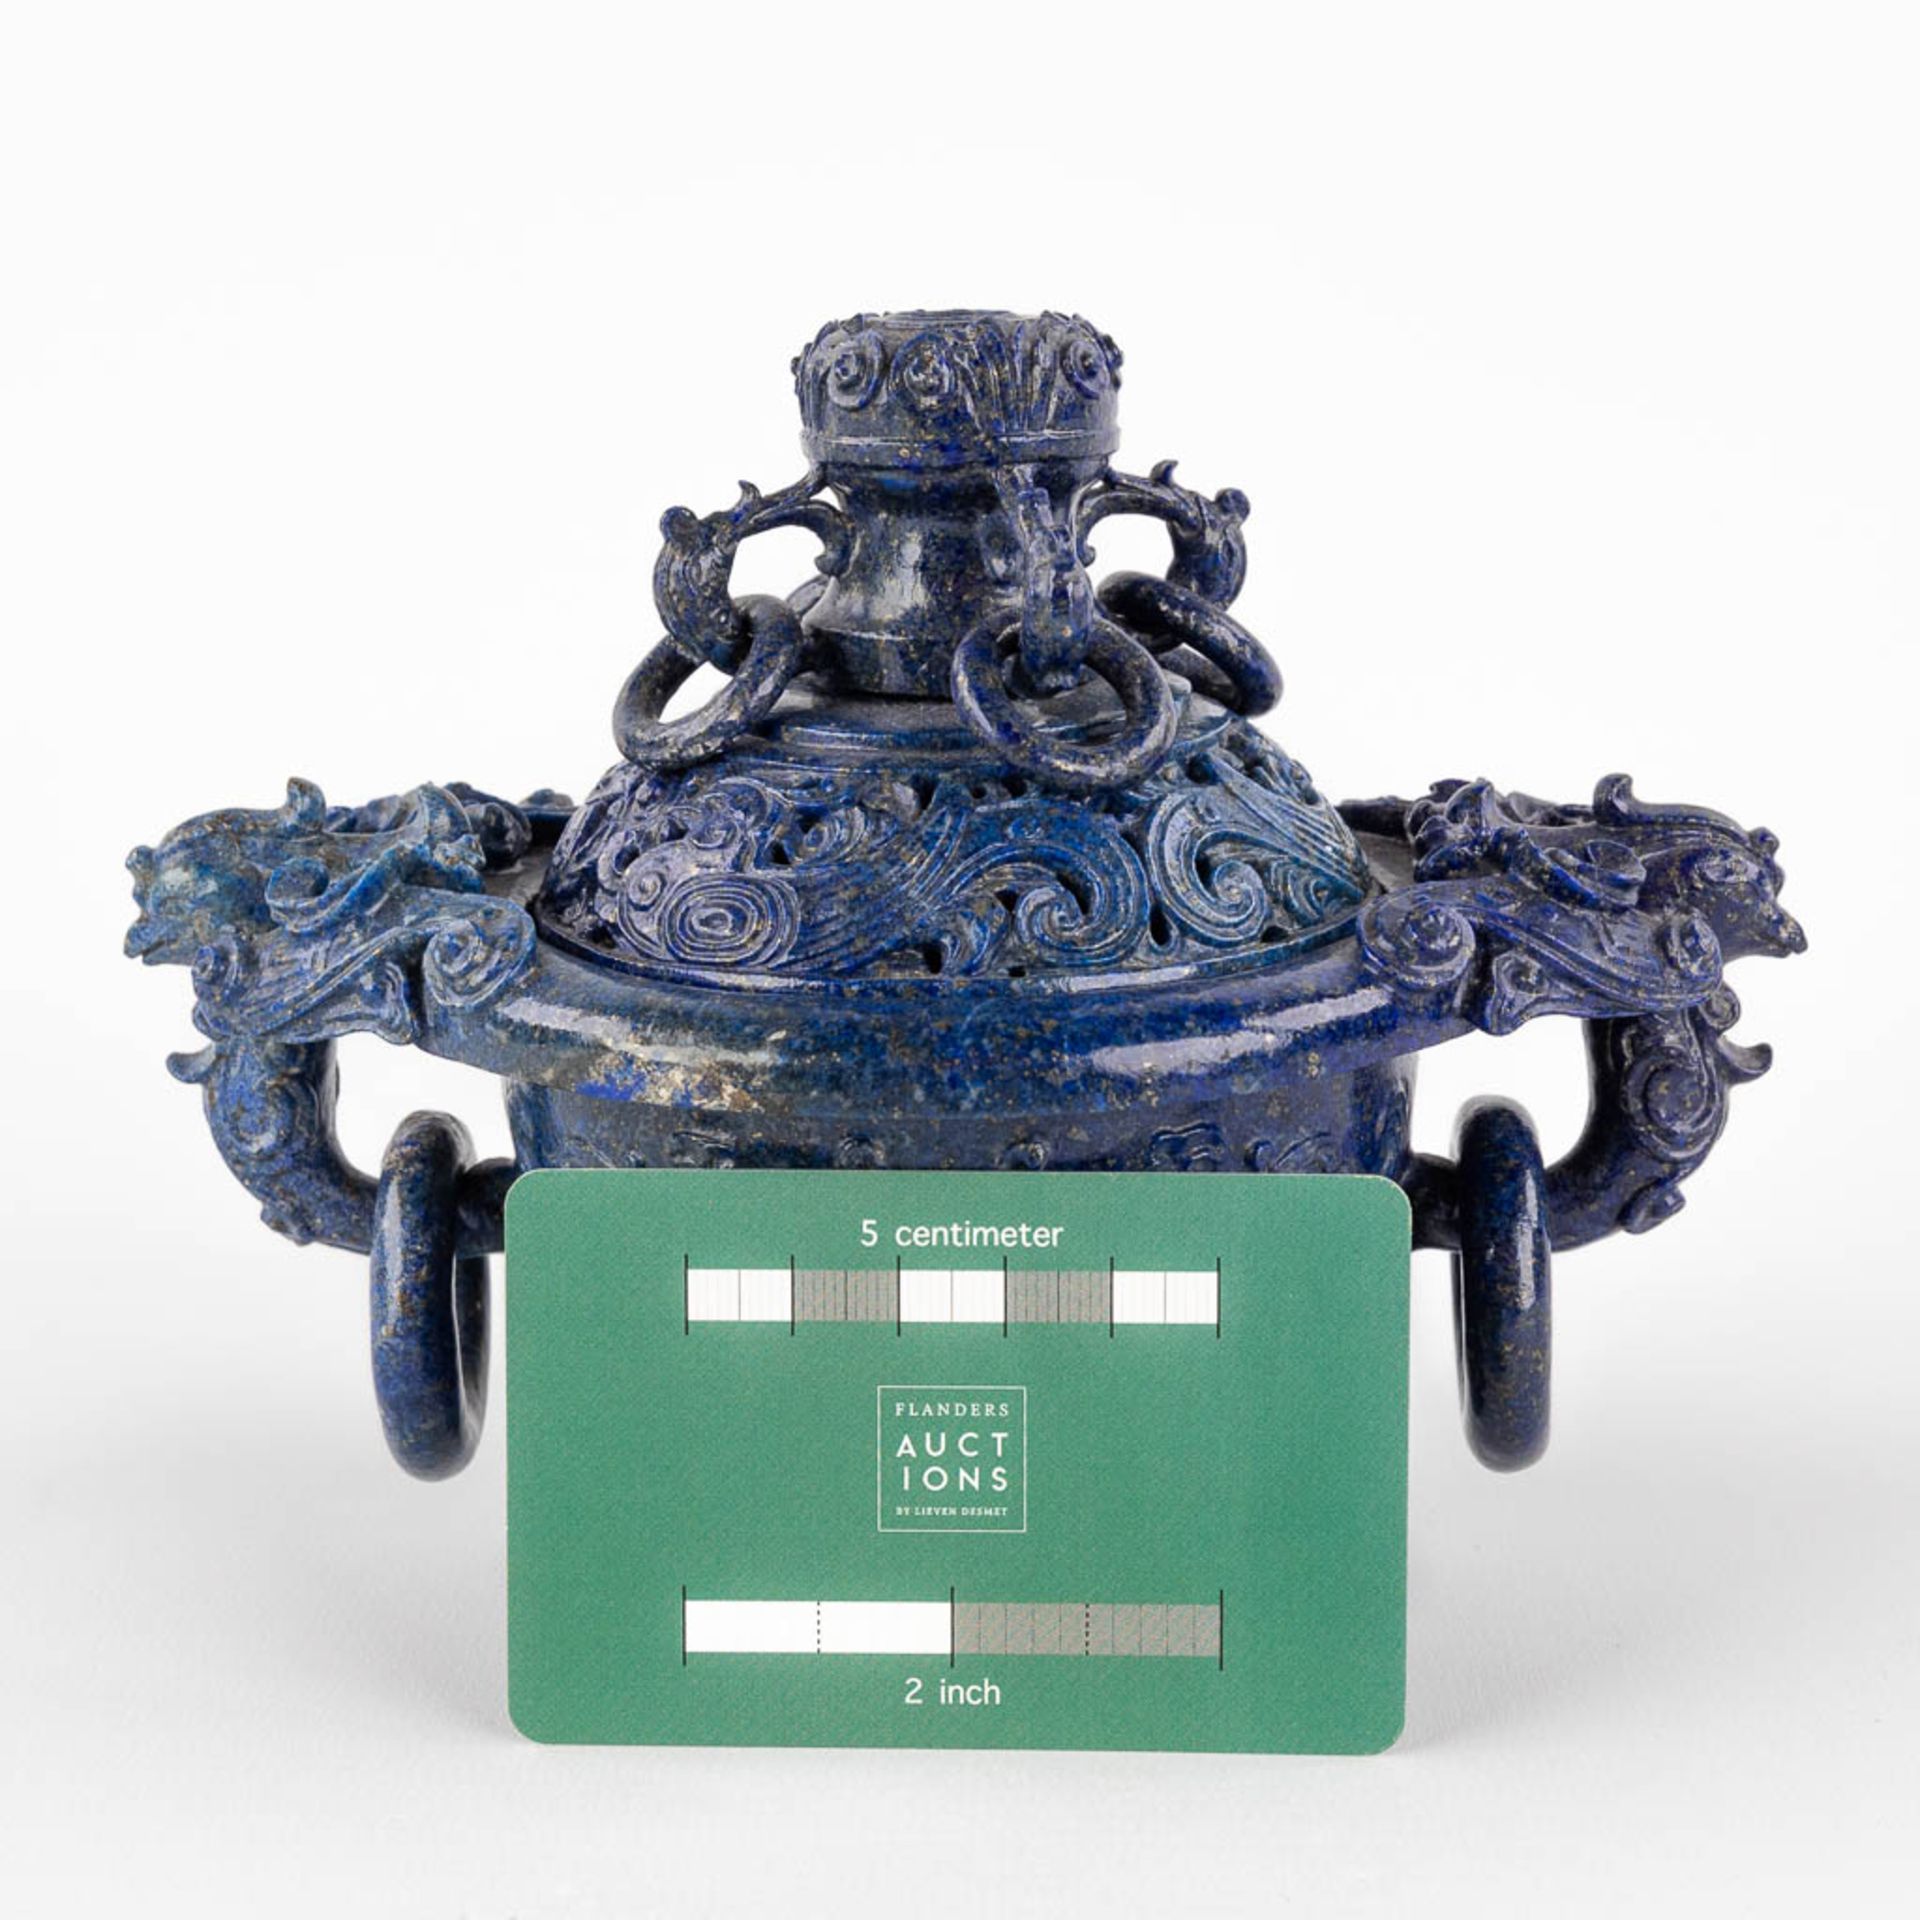 A Chinese censer, sculptured Lapis Lazuli, decorated with birds and flowers. (D:11 x W:17 x H:14 cm) - Image 2 of 11